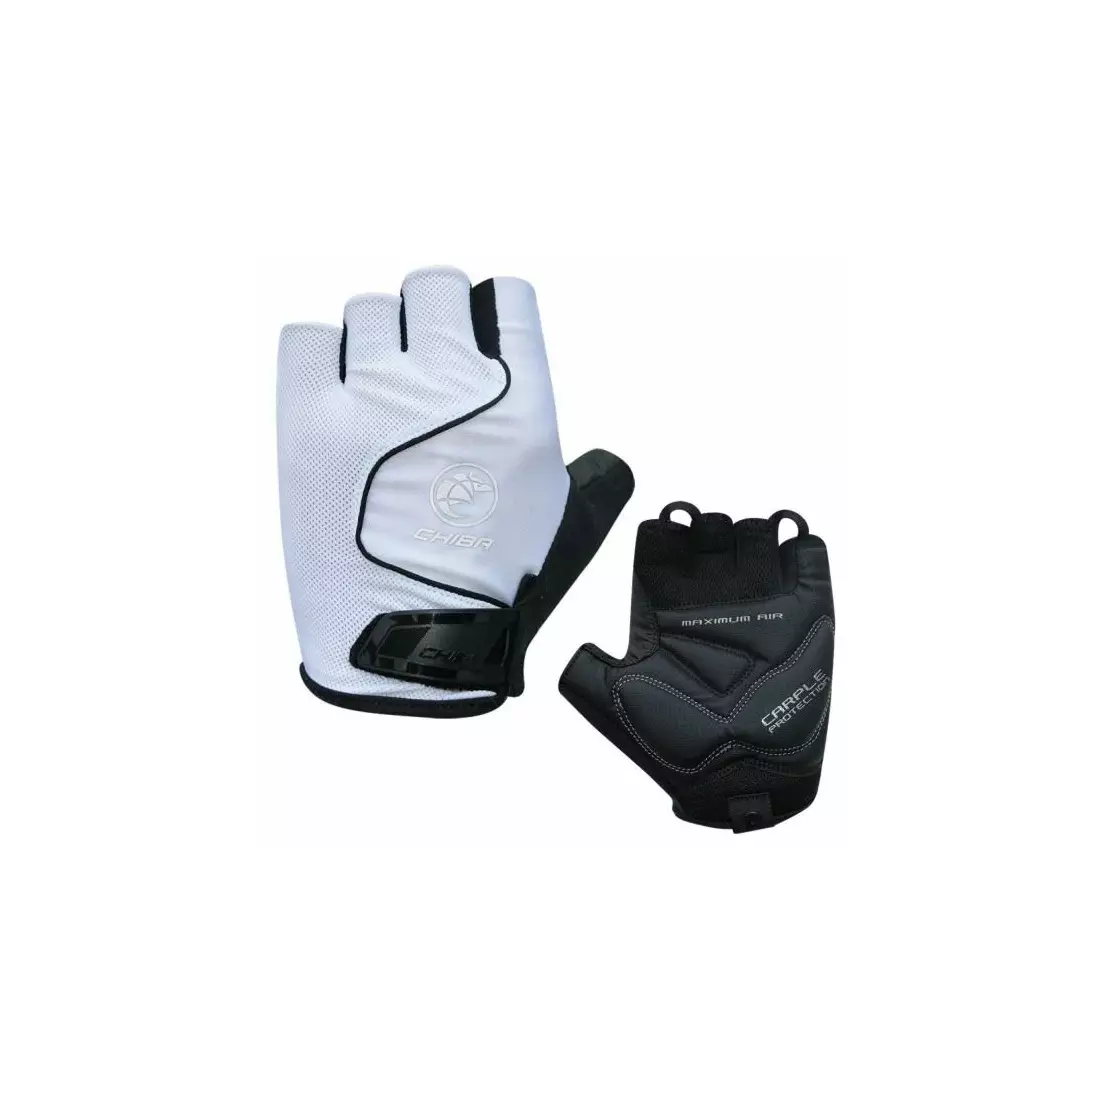 CHIBA COOL AIR cycling gloves, black and white